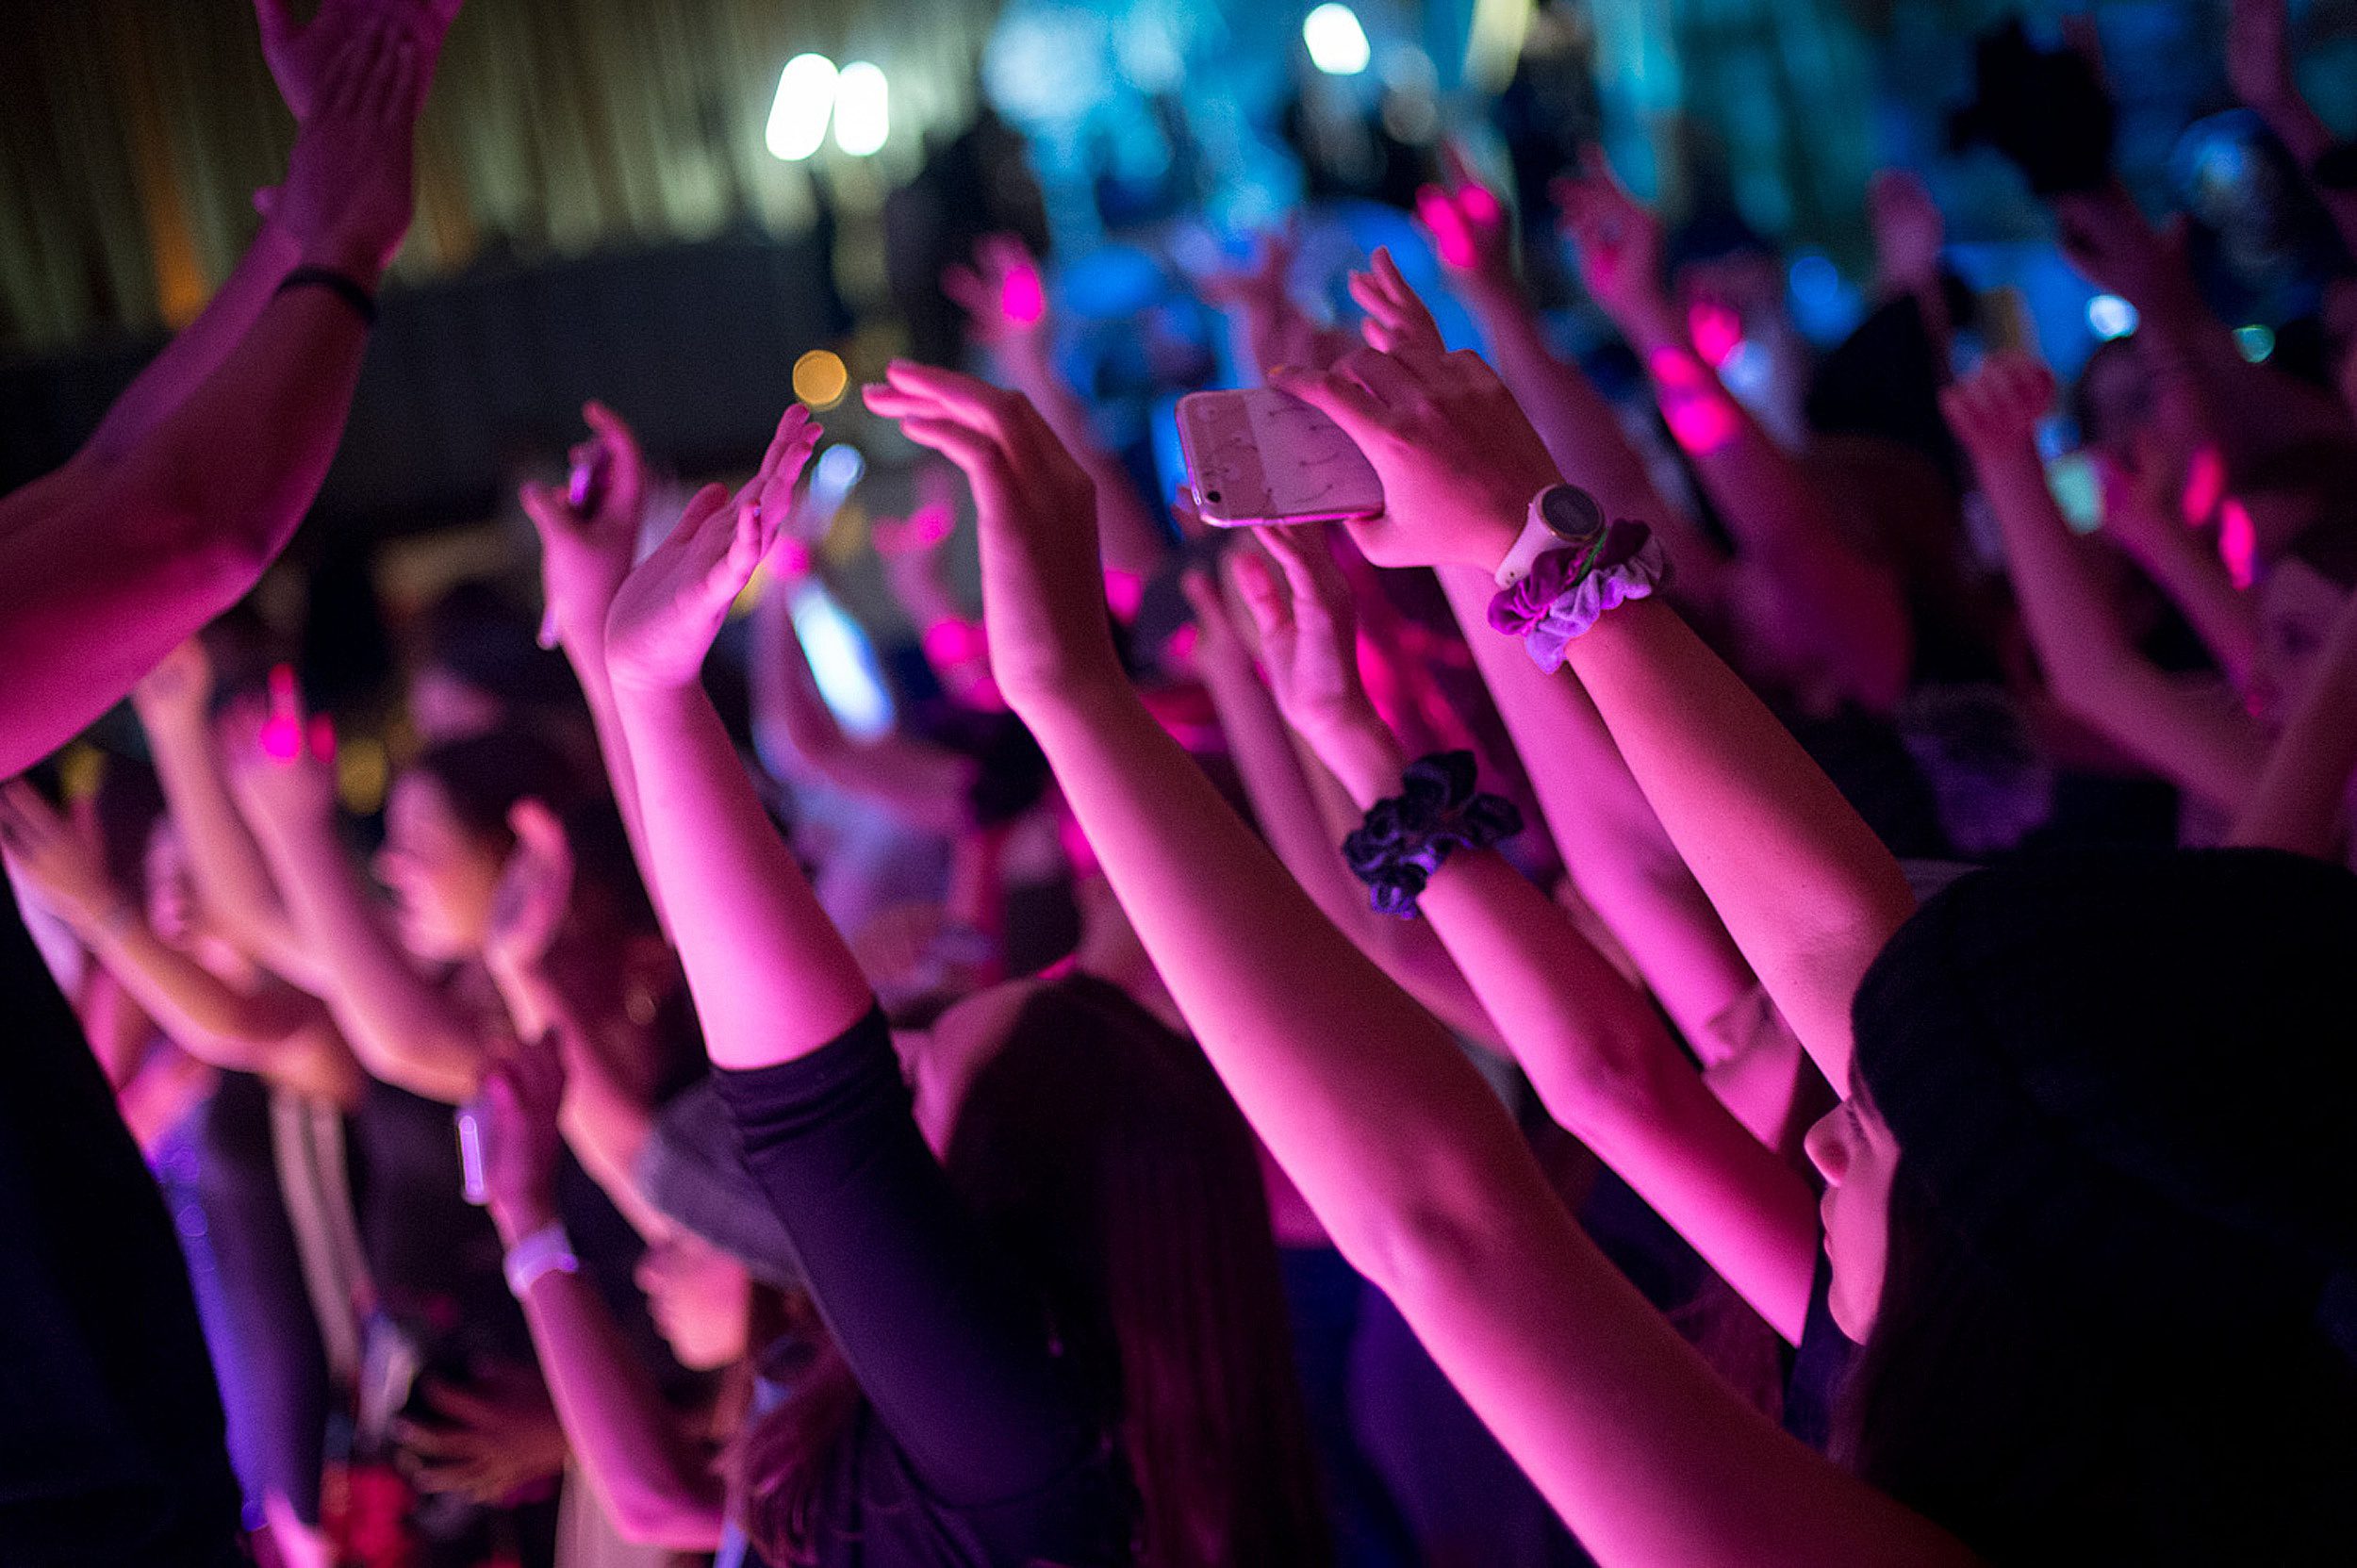 Teenagers raise their hands and phones while dancing at a Bar or Bat Mitzvah